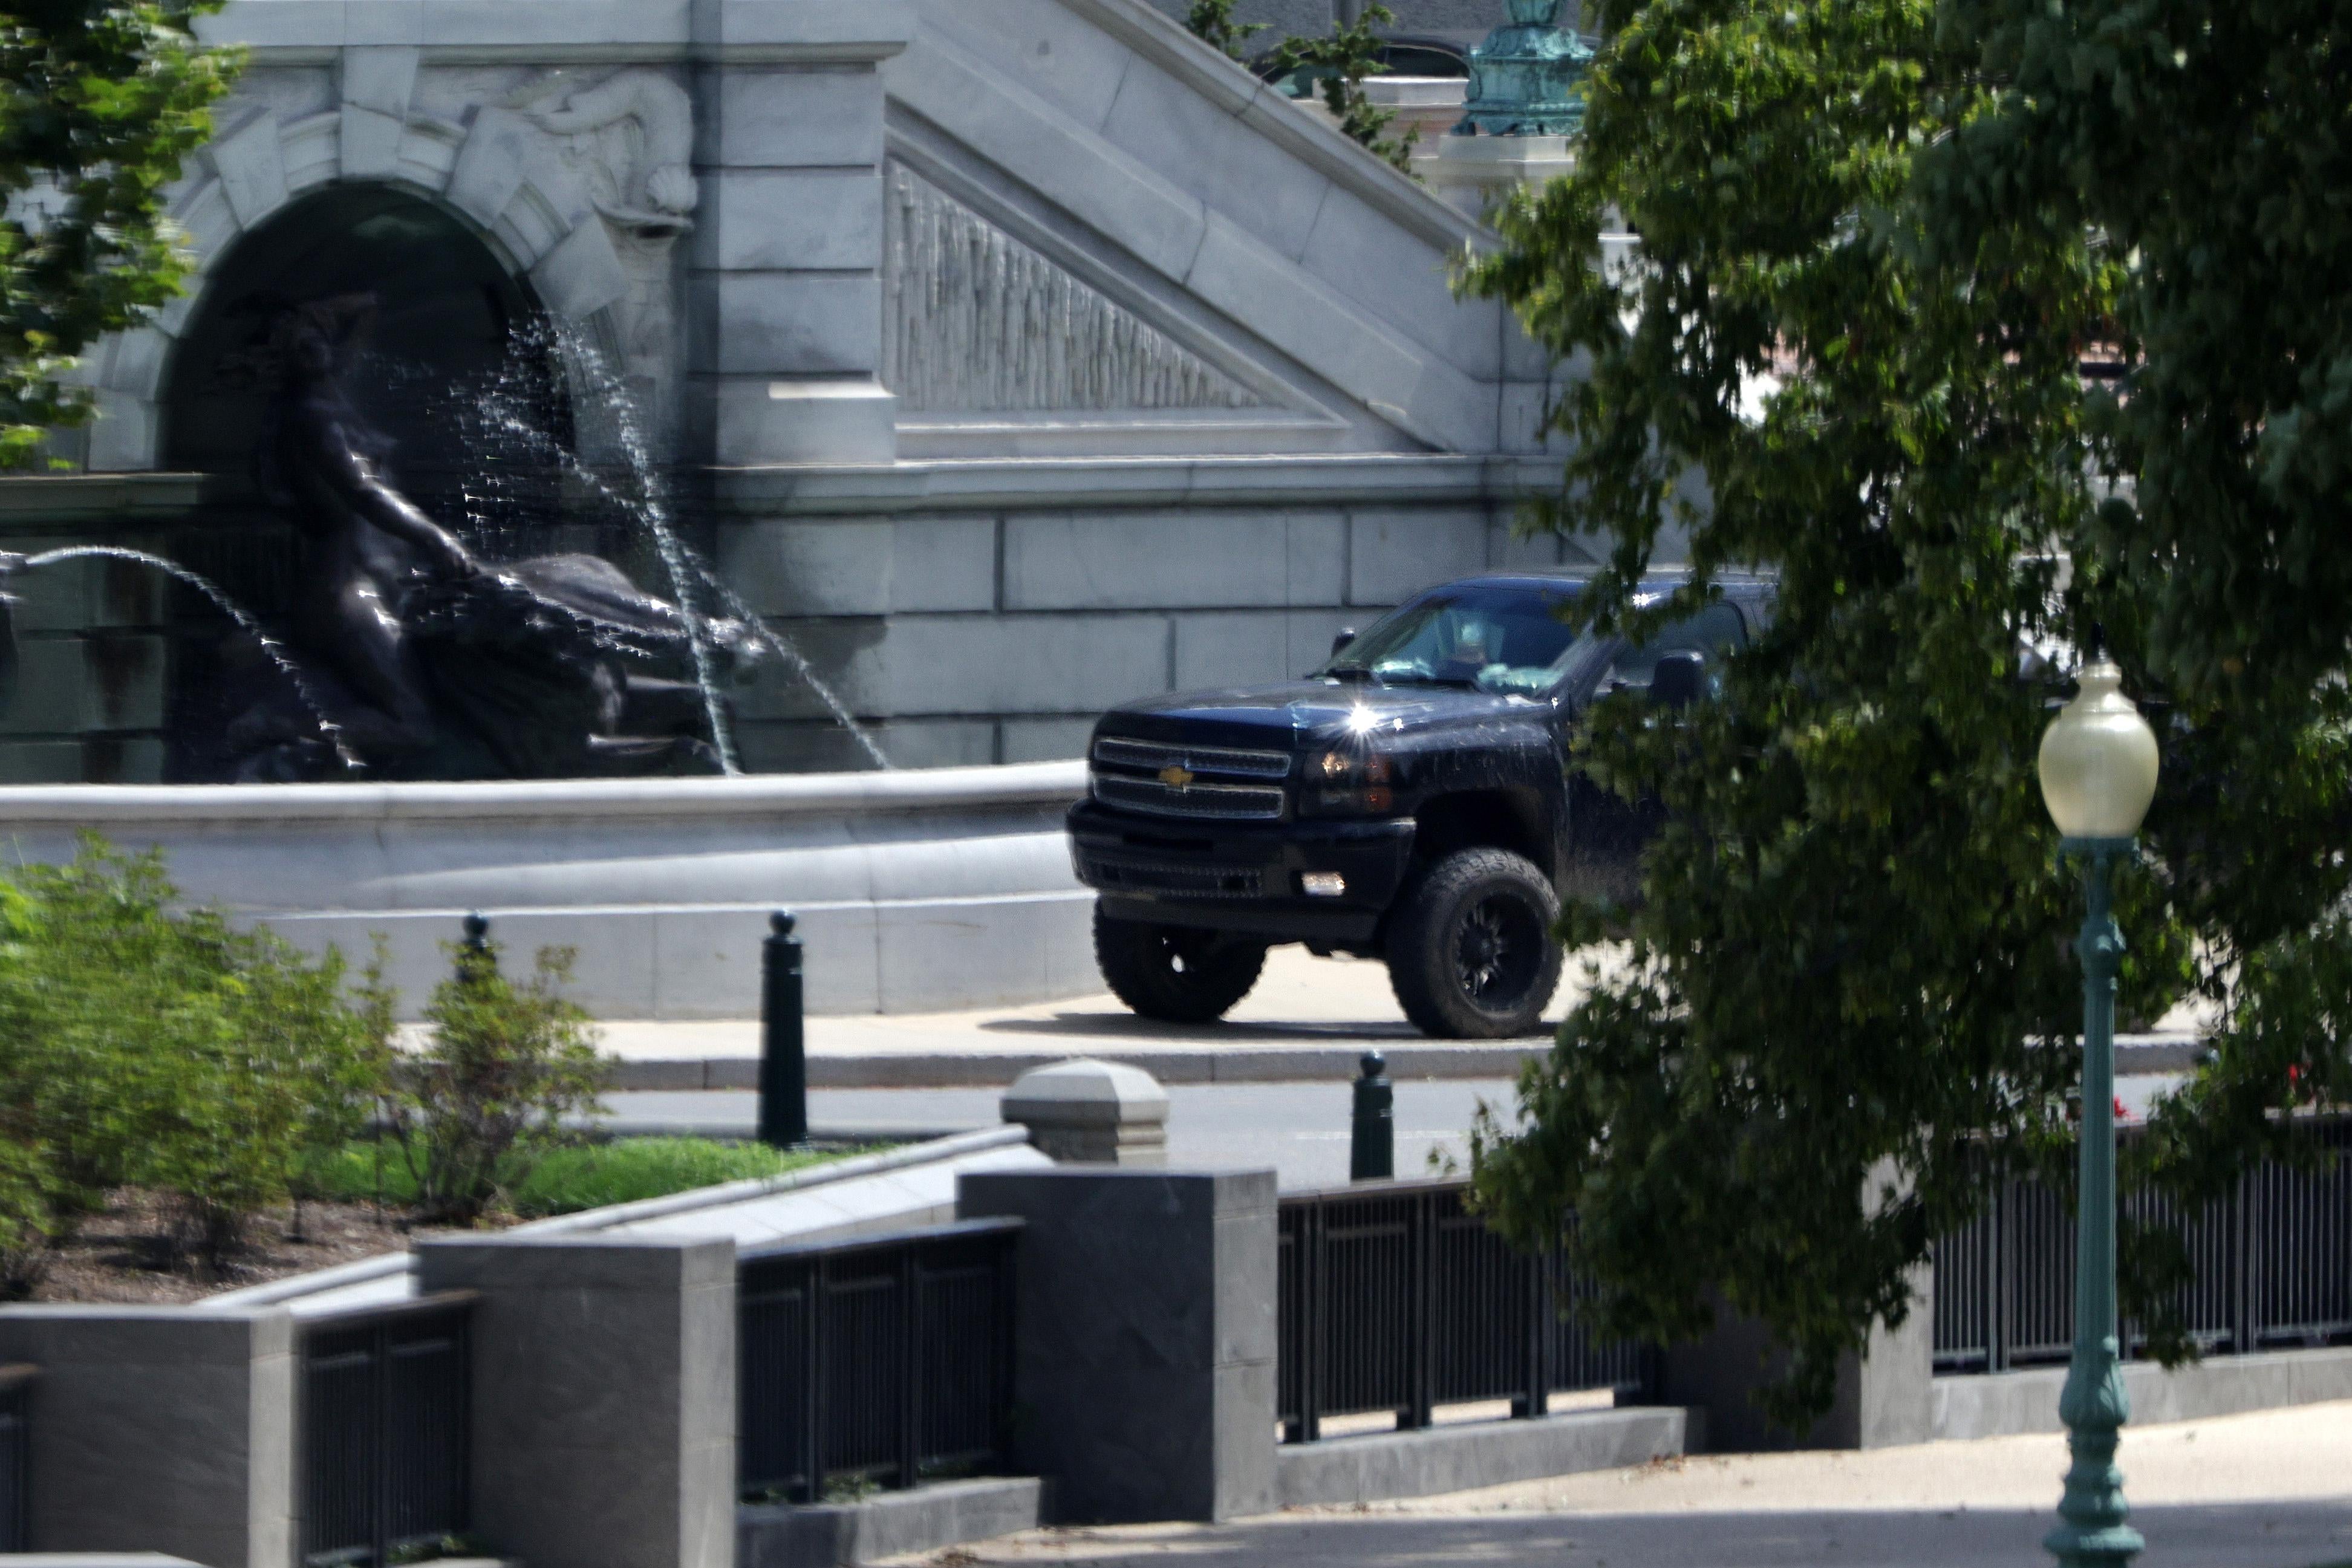 A pickup truck sits outside the Library of Congress.